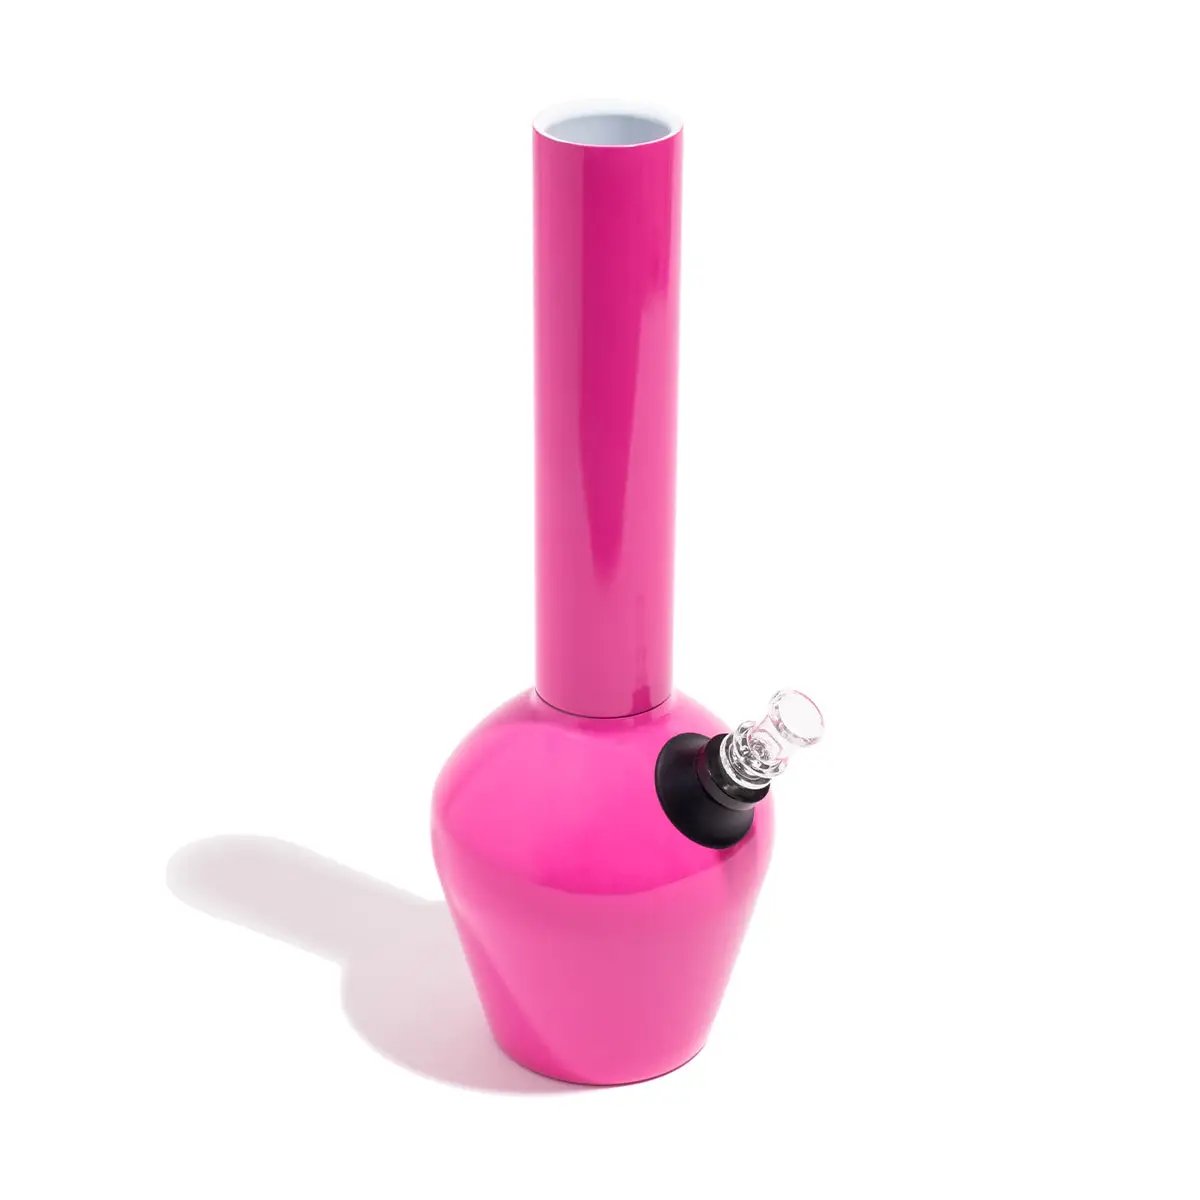 Chill - Mix & Match Series - Neon Pink Gloss by Chill Steel Pipes